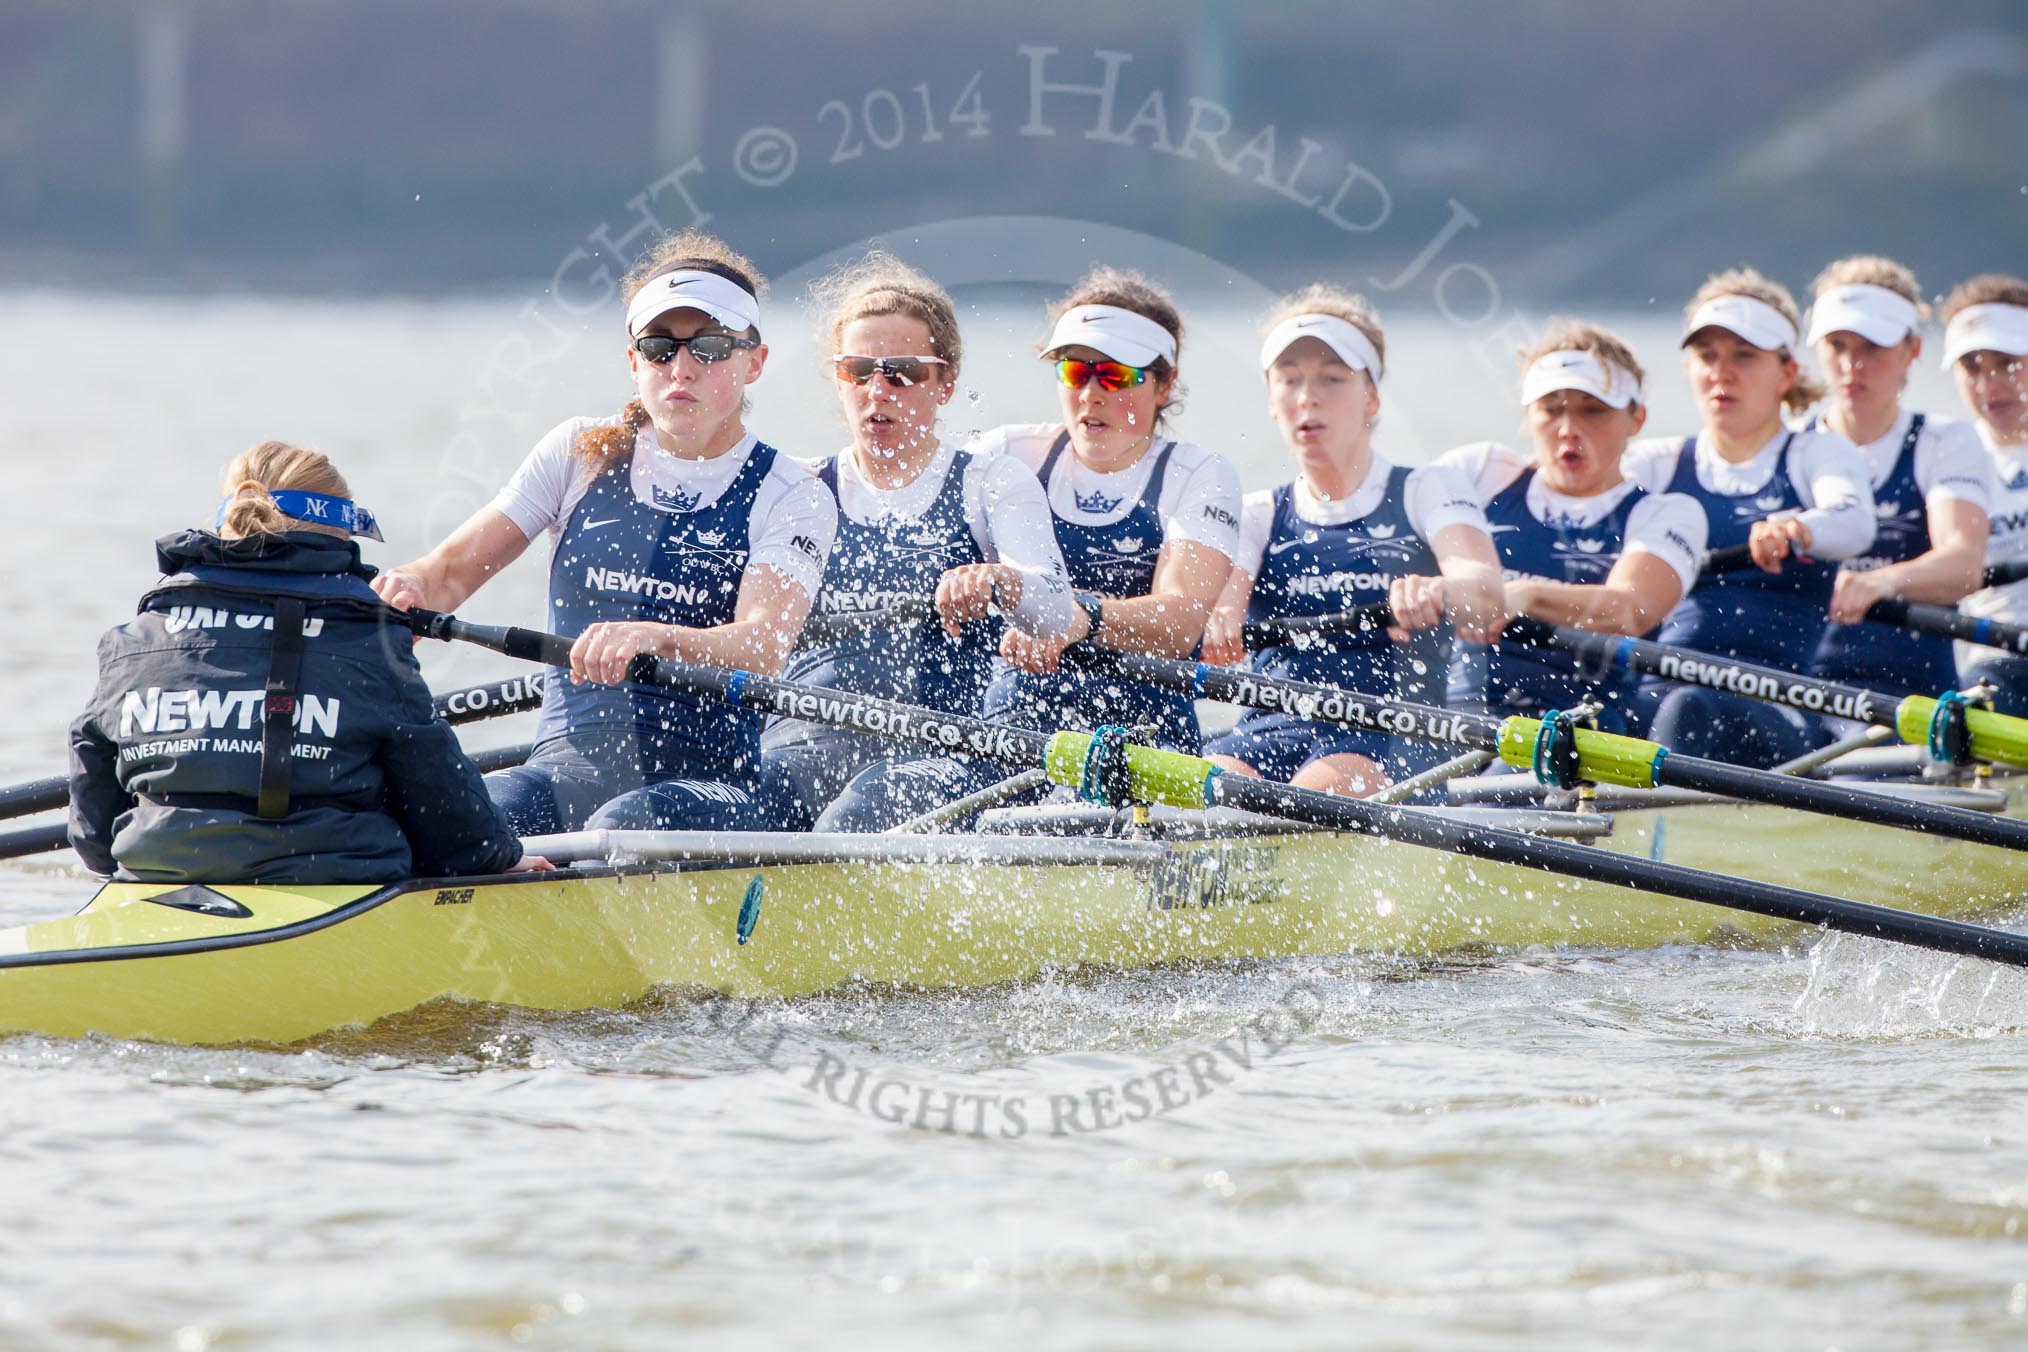 The Boat Race season 2014 - fixture OUWBC vs Molesey BC.




on 01 March 2014 at 12:32, image #58